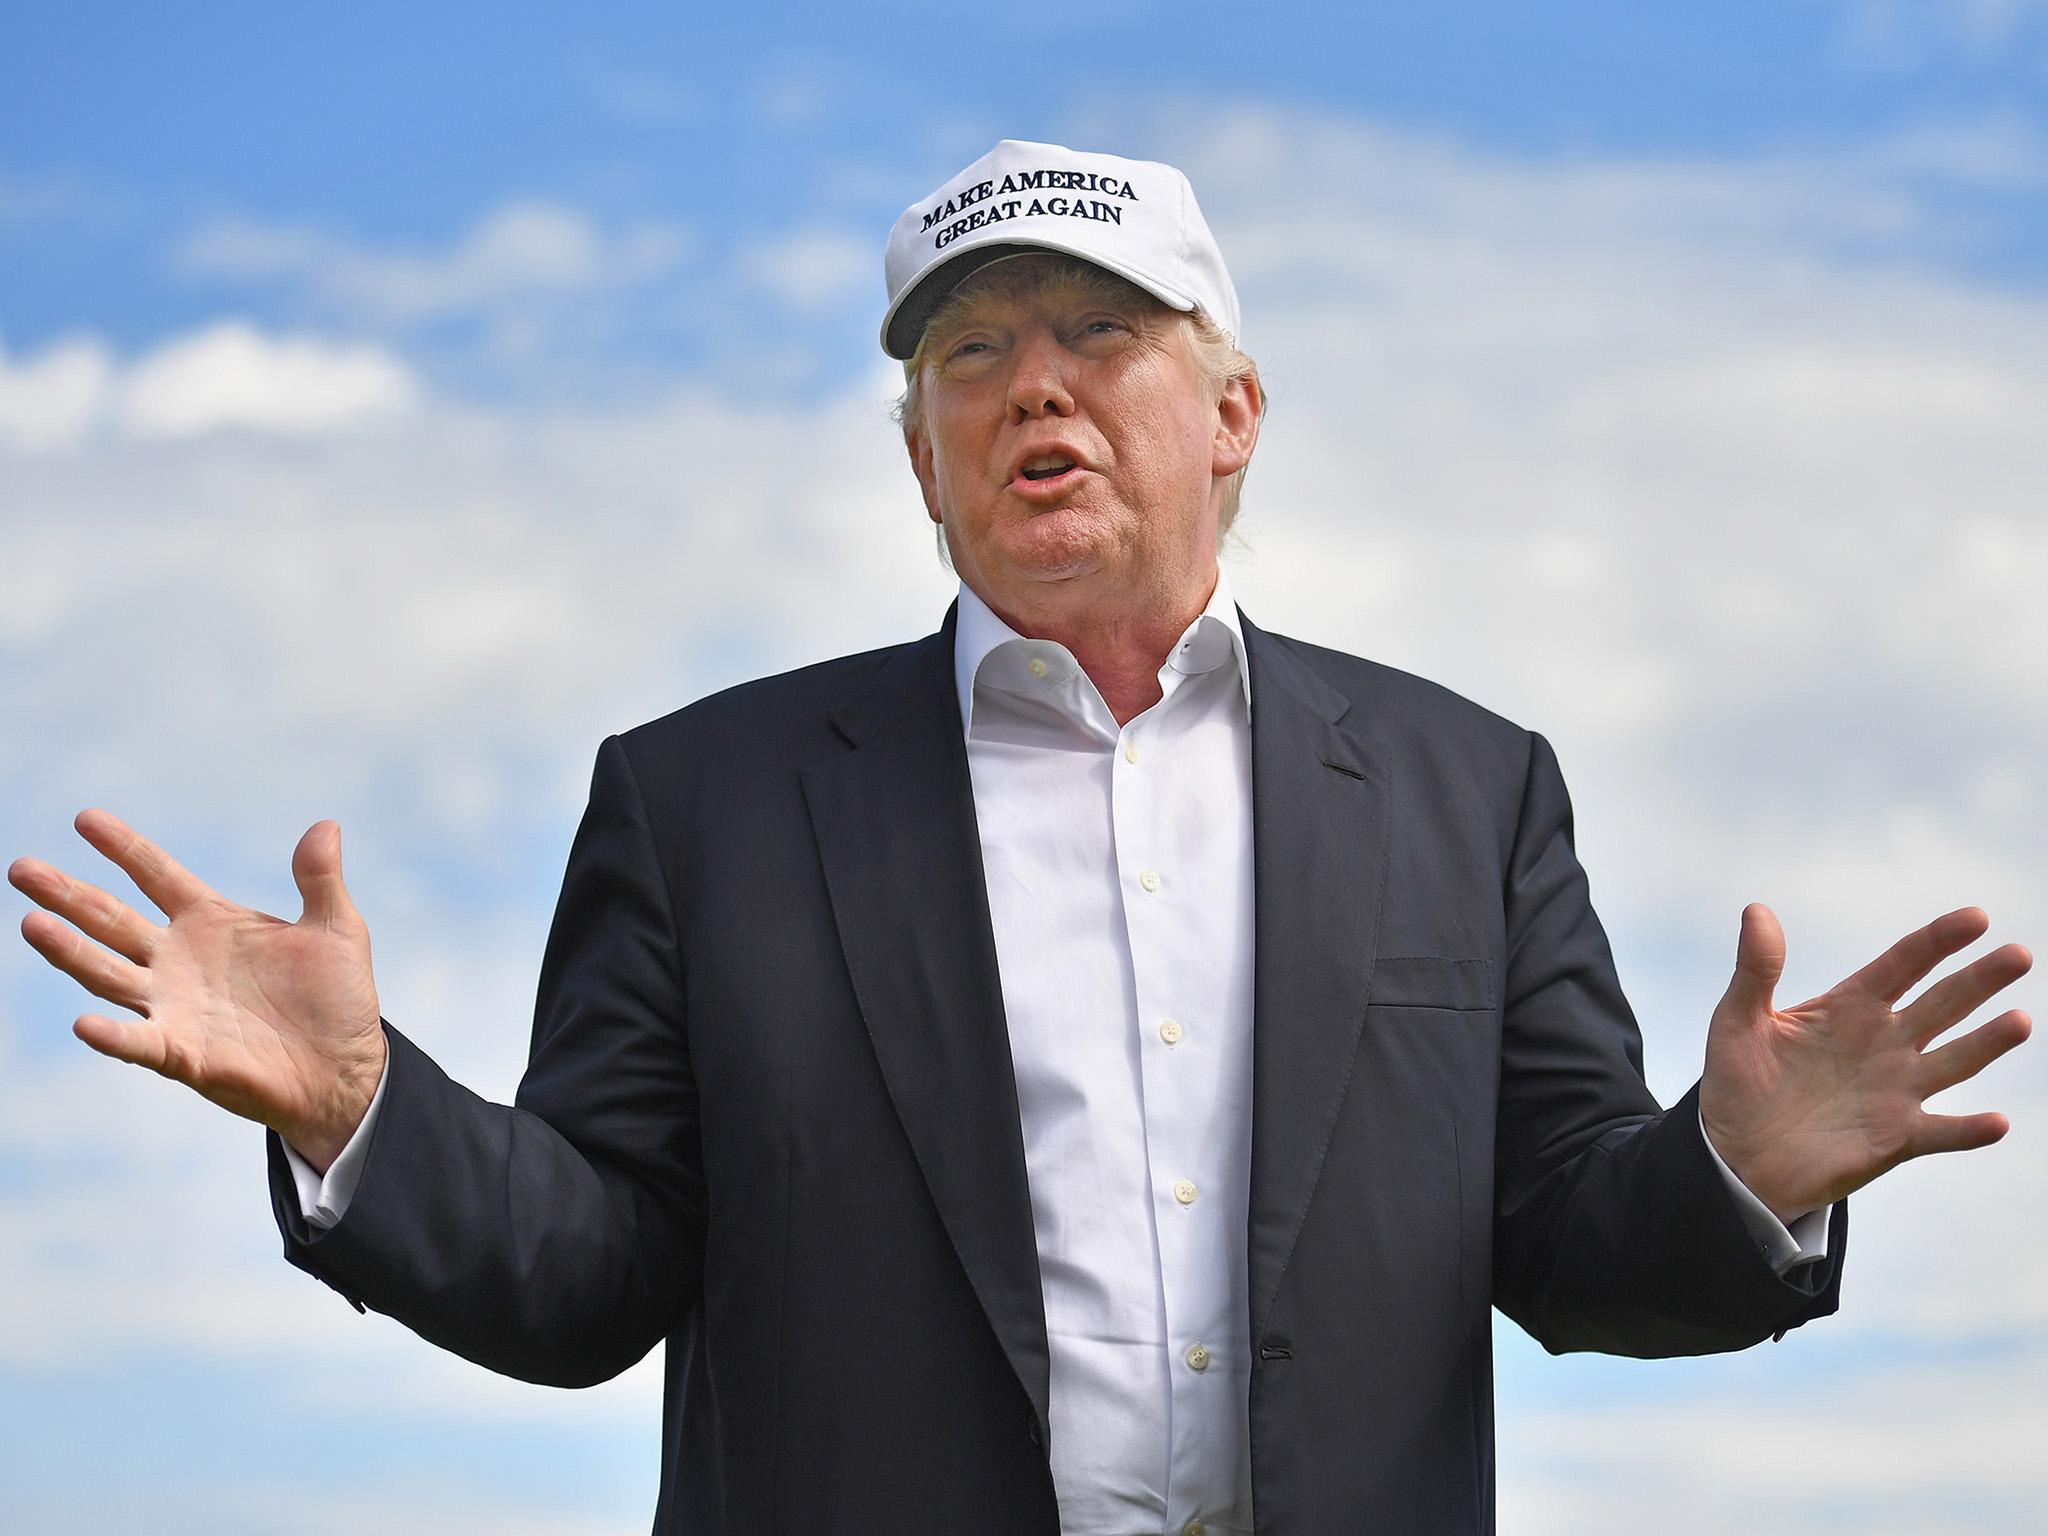 Donald Trump owns some of earth’s “greatest” golf resorts